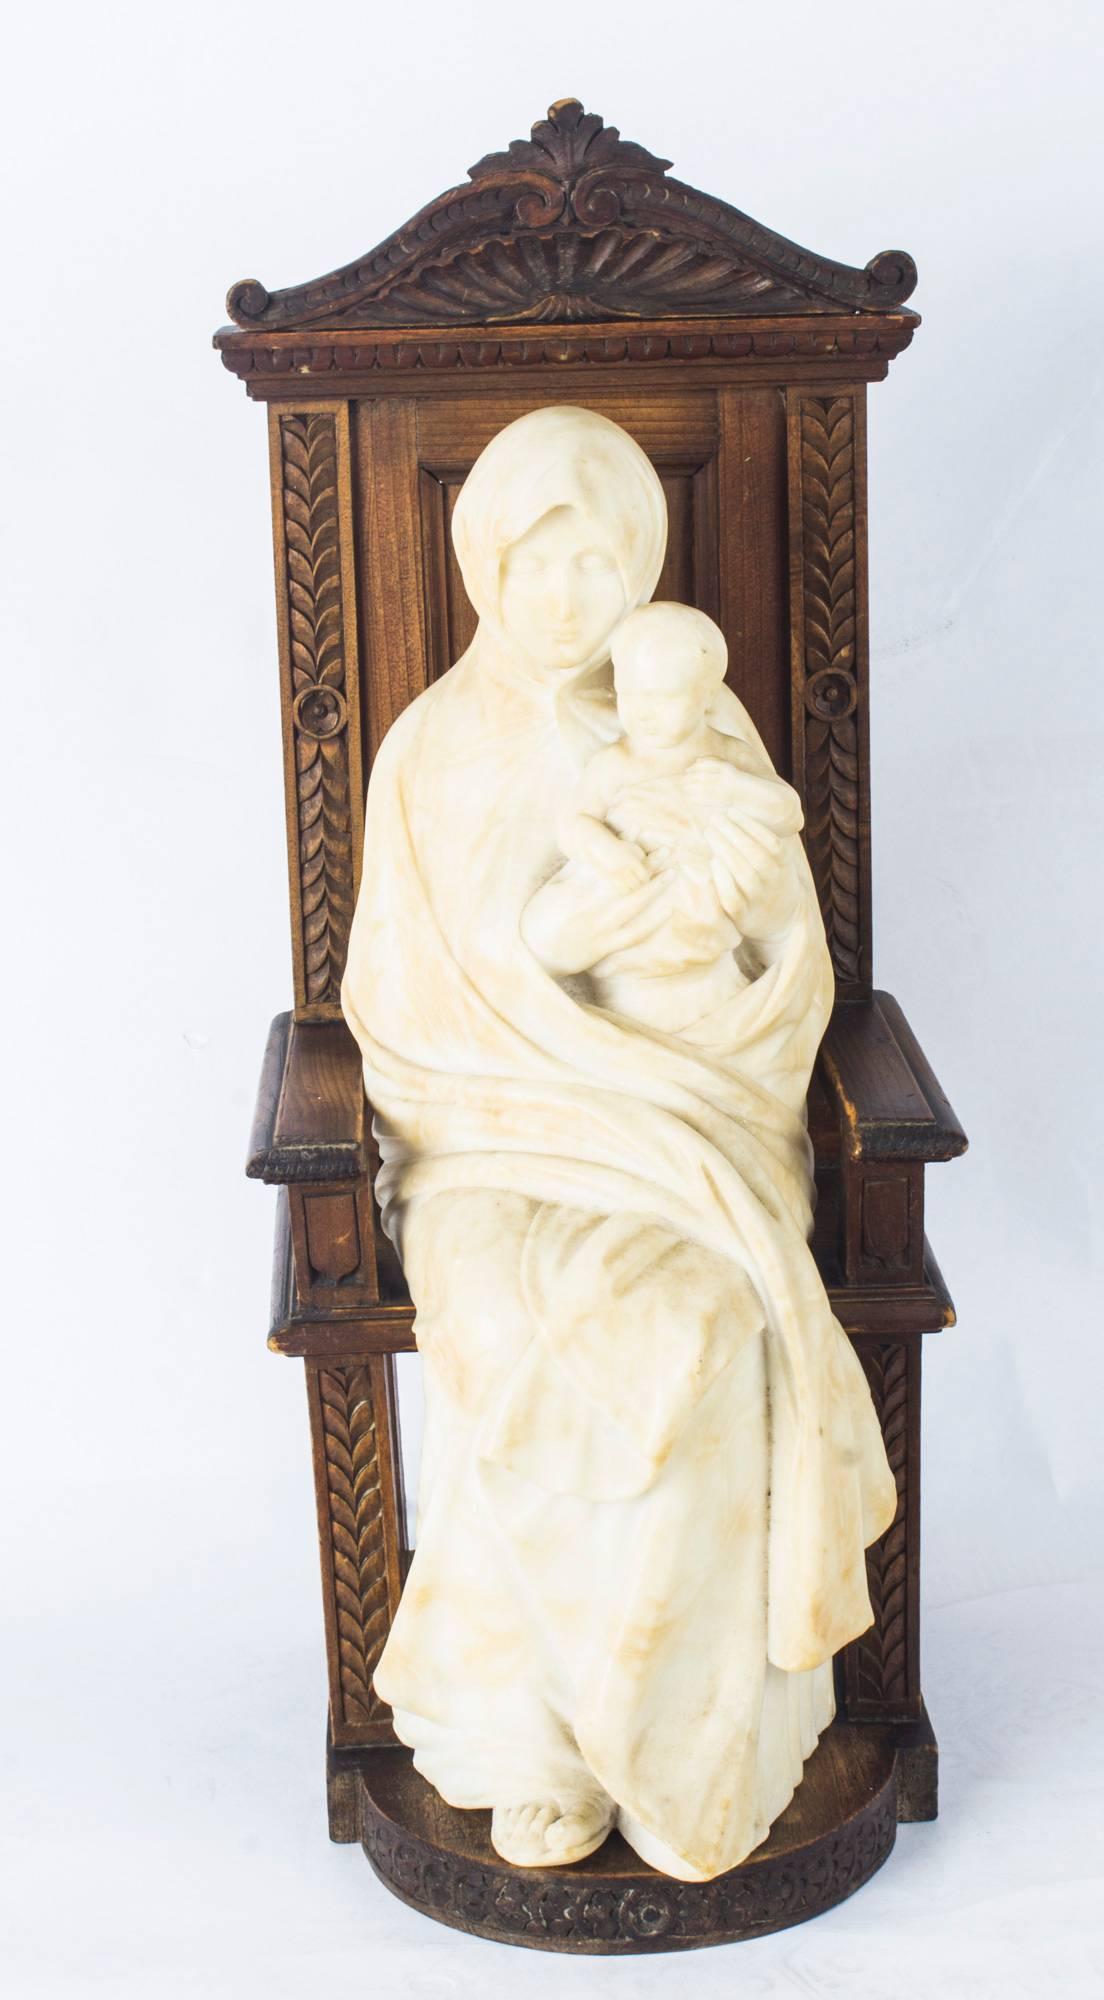 A superb large antique Italian marble sculpture of Madonna and child seated on an oak throne, signed and dated G.Gamilo '97, for 1897, to the base.

This delicately carved Carrara marble sculpture features the Nikopoia or Madonna dressed in long